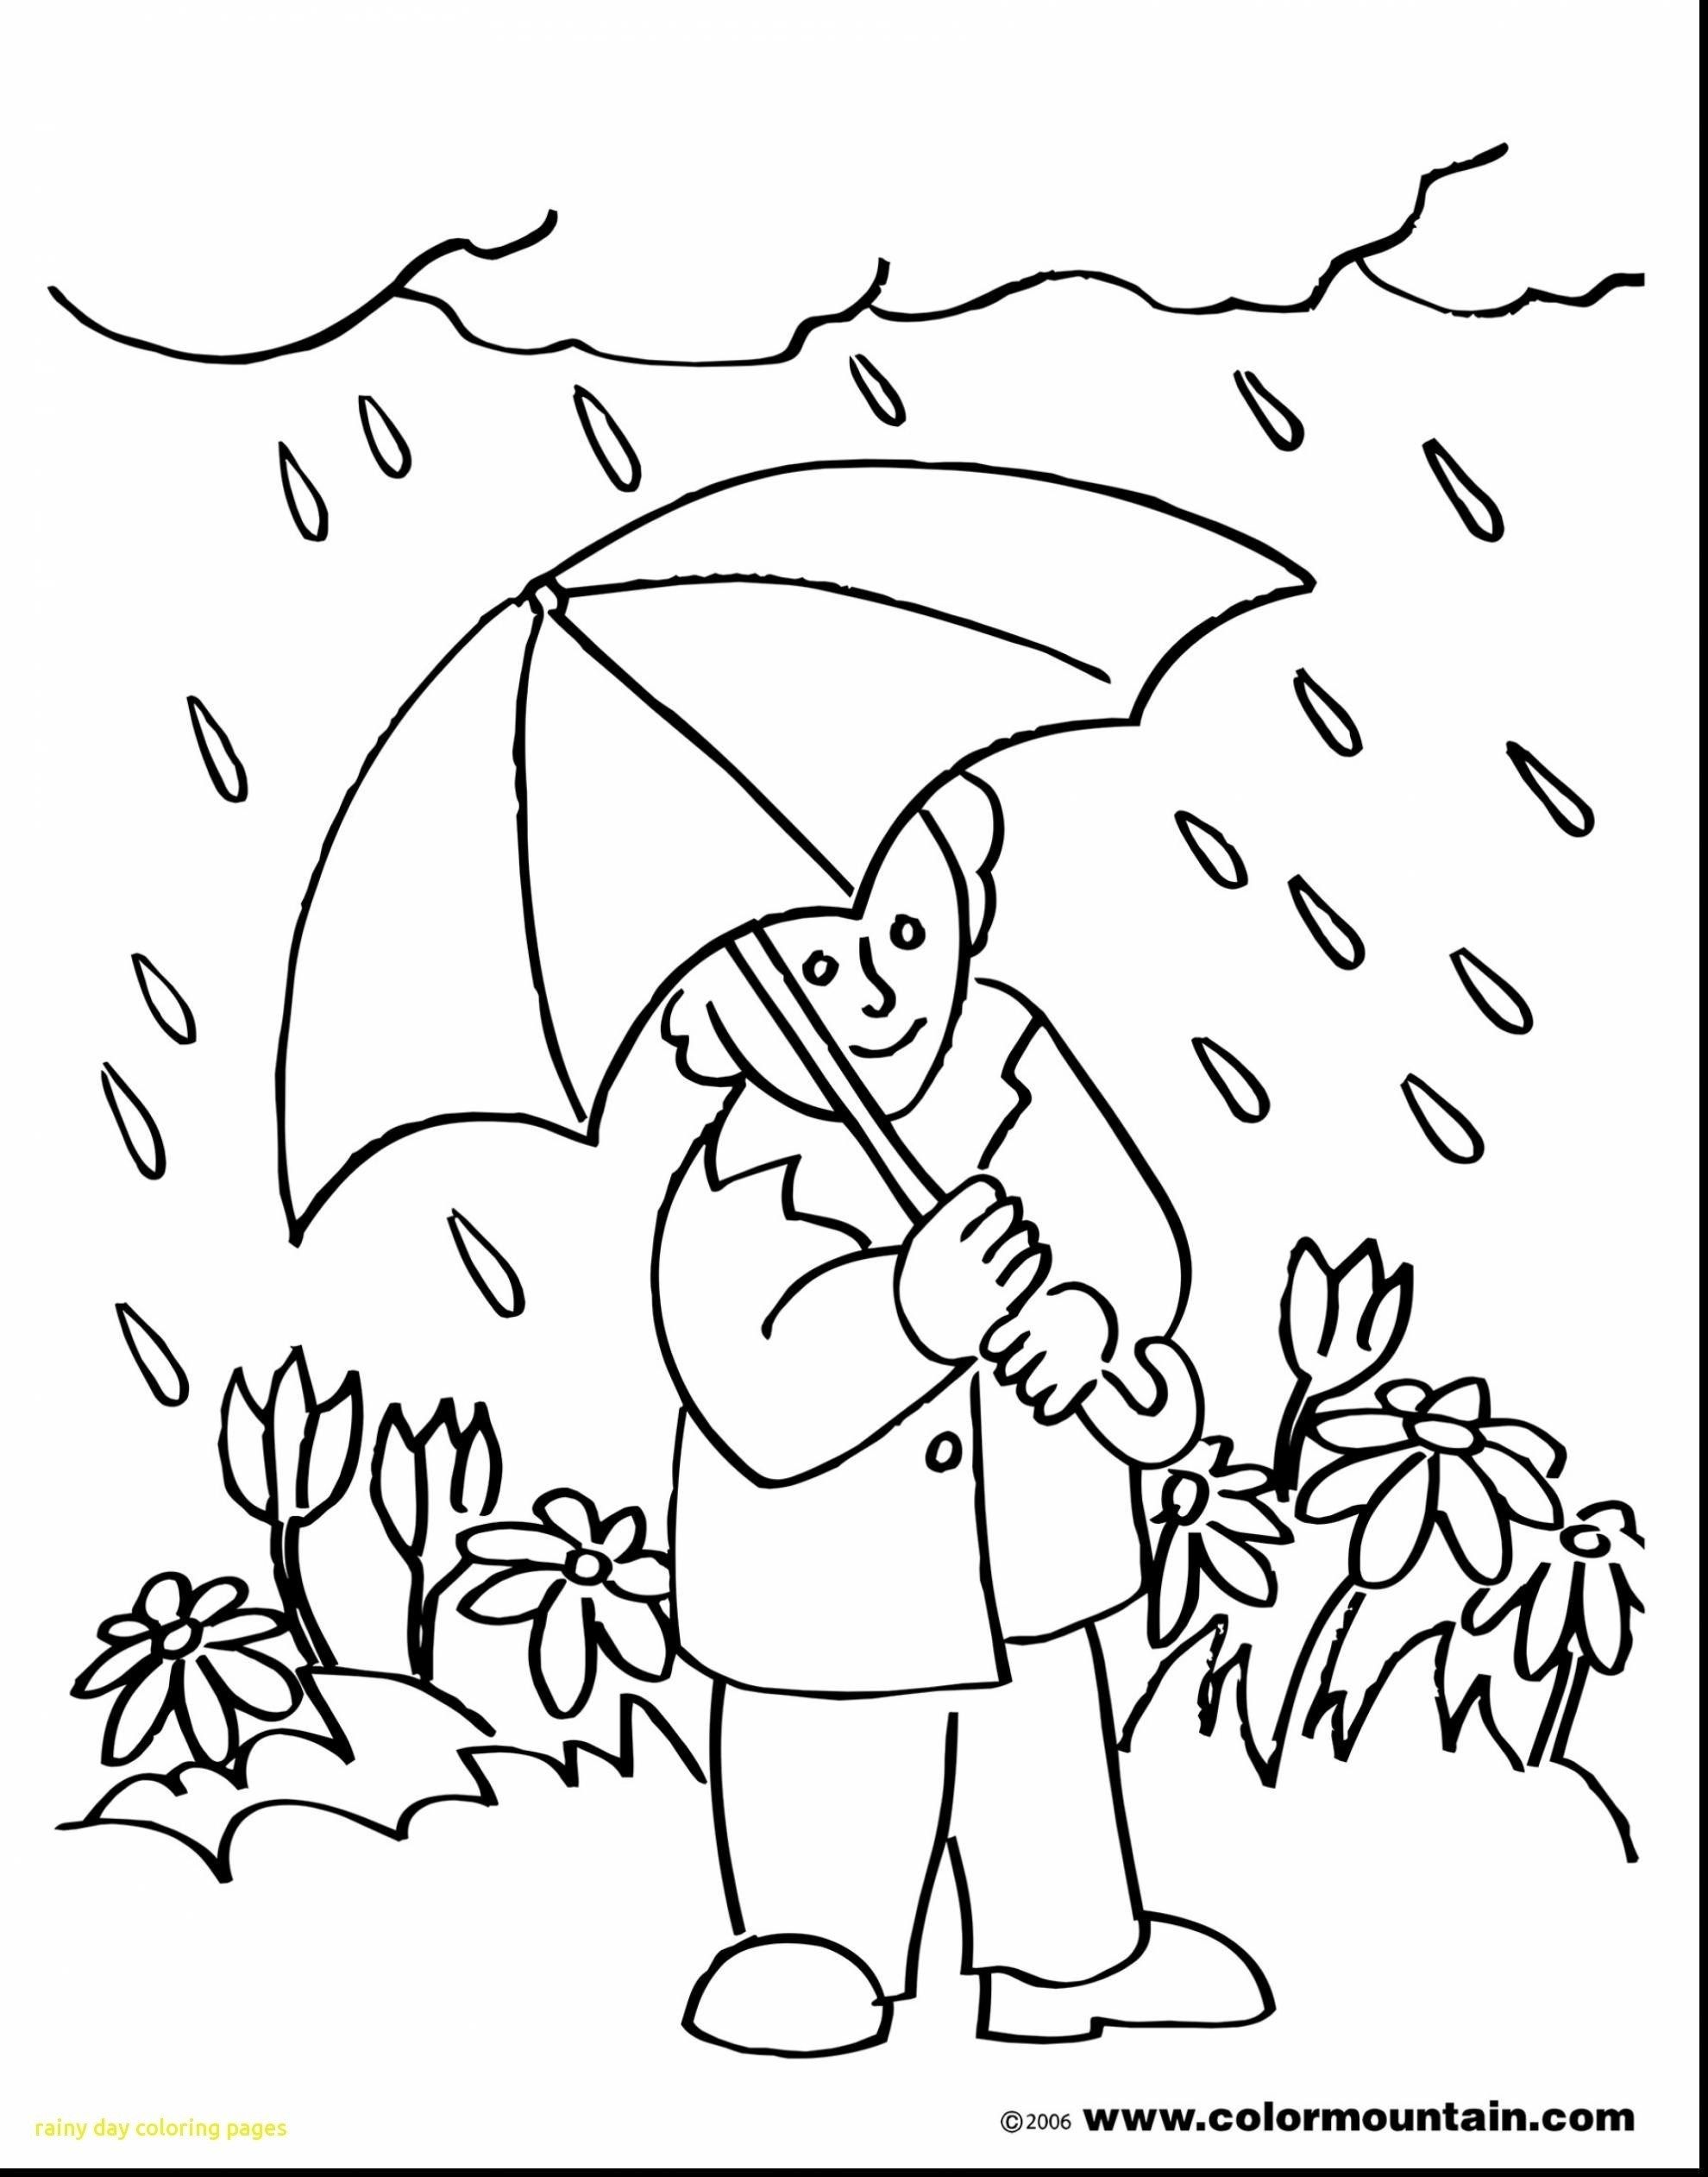 rainy-day-coloring-page-easy-drawing-guides